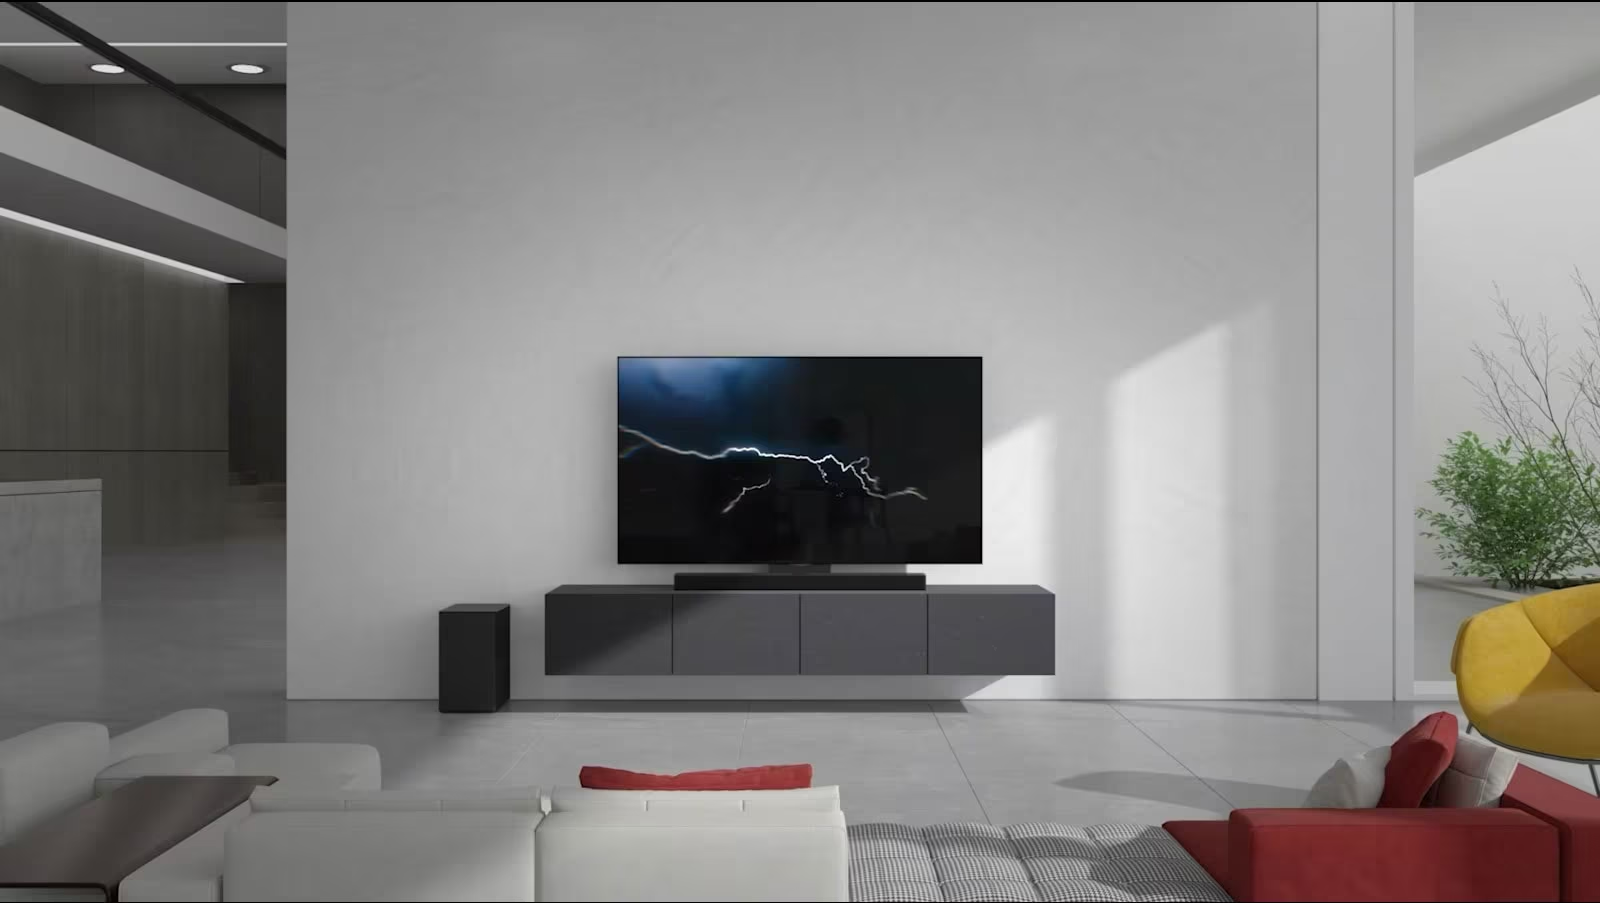 The Soundbar  is placed on gray cabinet with a TV in the living room. A black wireless subwoofer is placed on the floor on the left side and the sunlight comes in from the right side of the picture. A white and red colored long sofa is placed facing the TV and Soundbar .